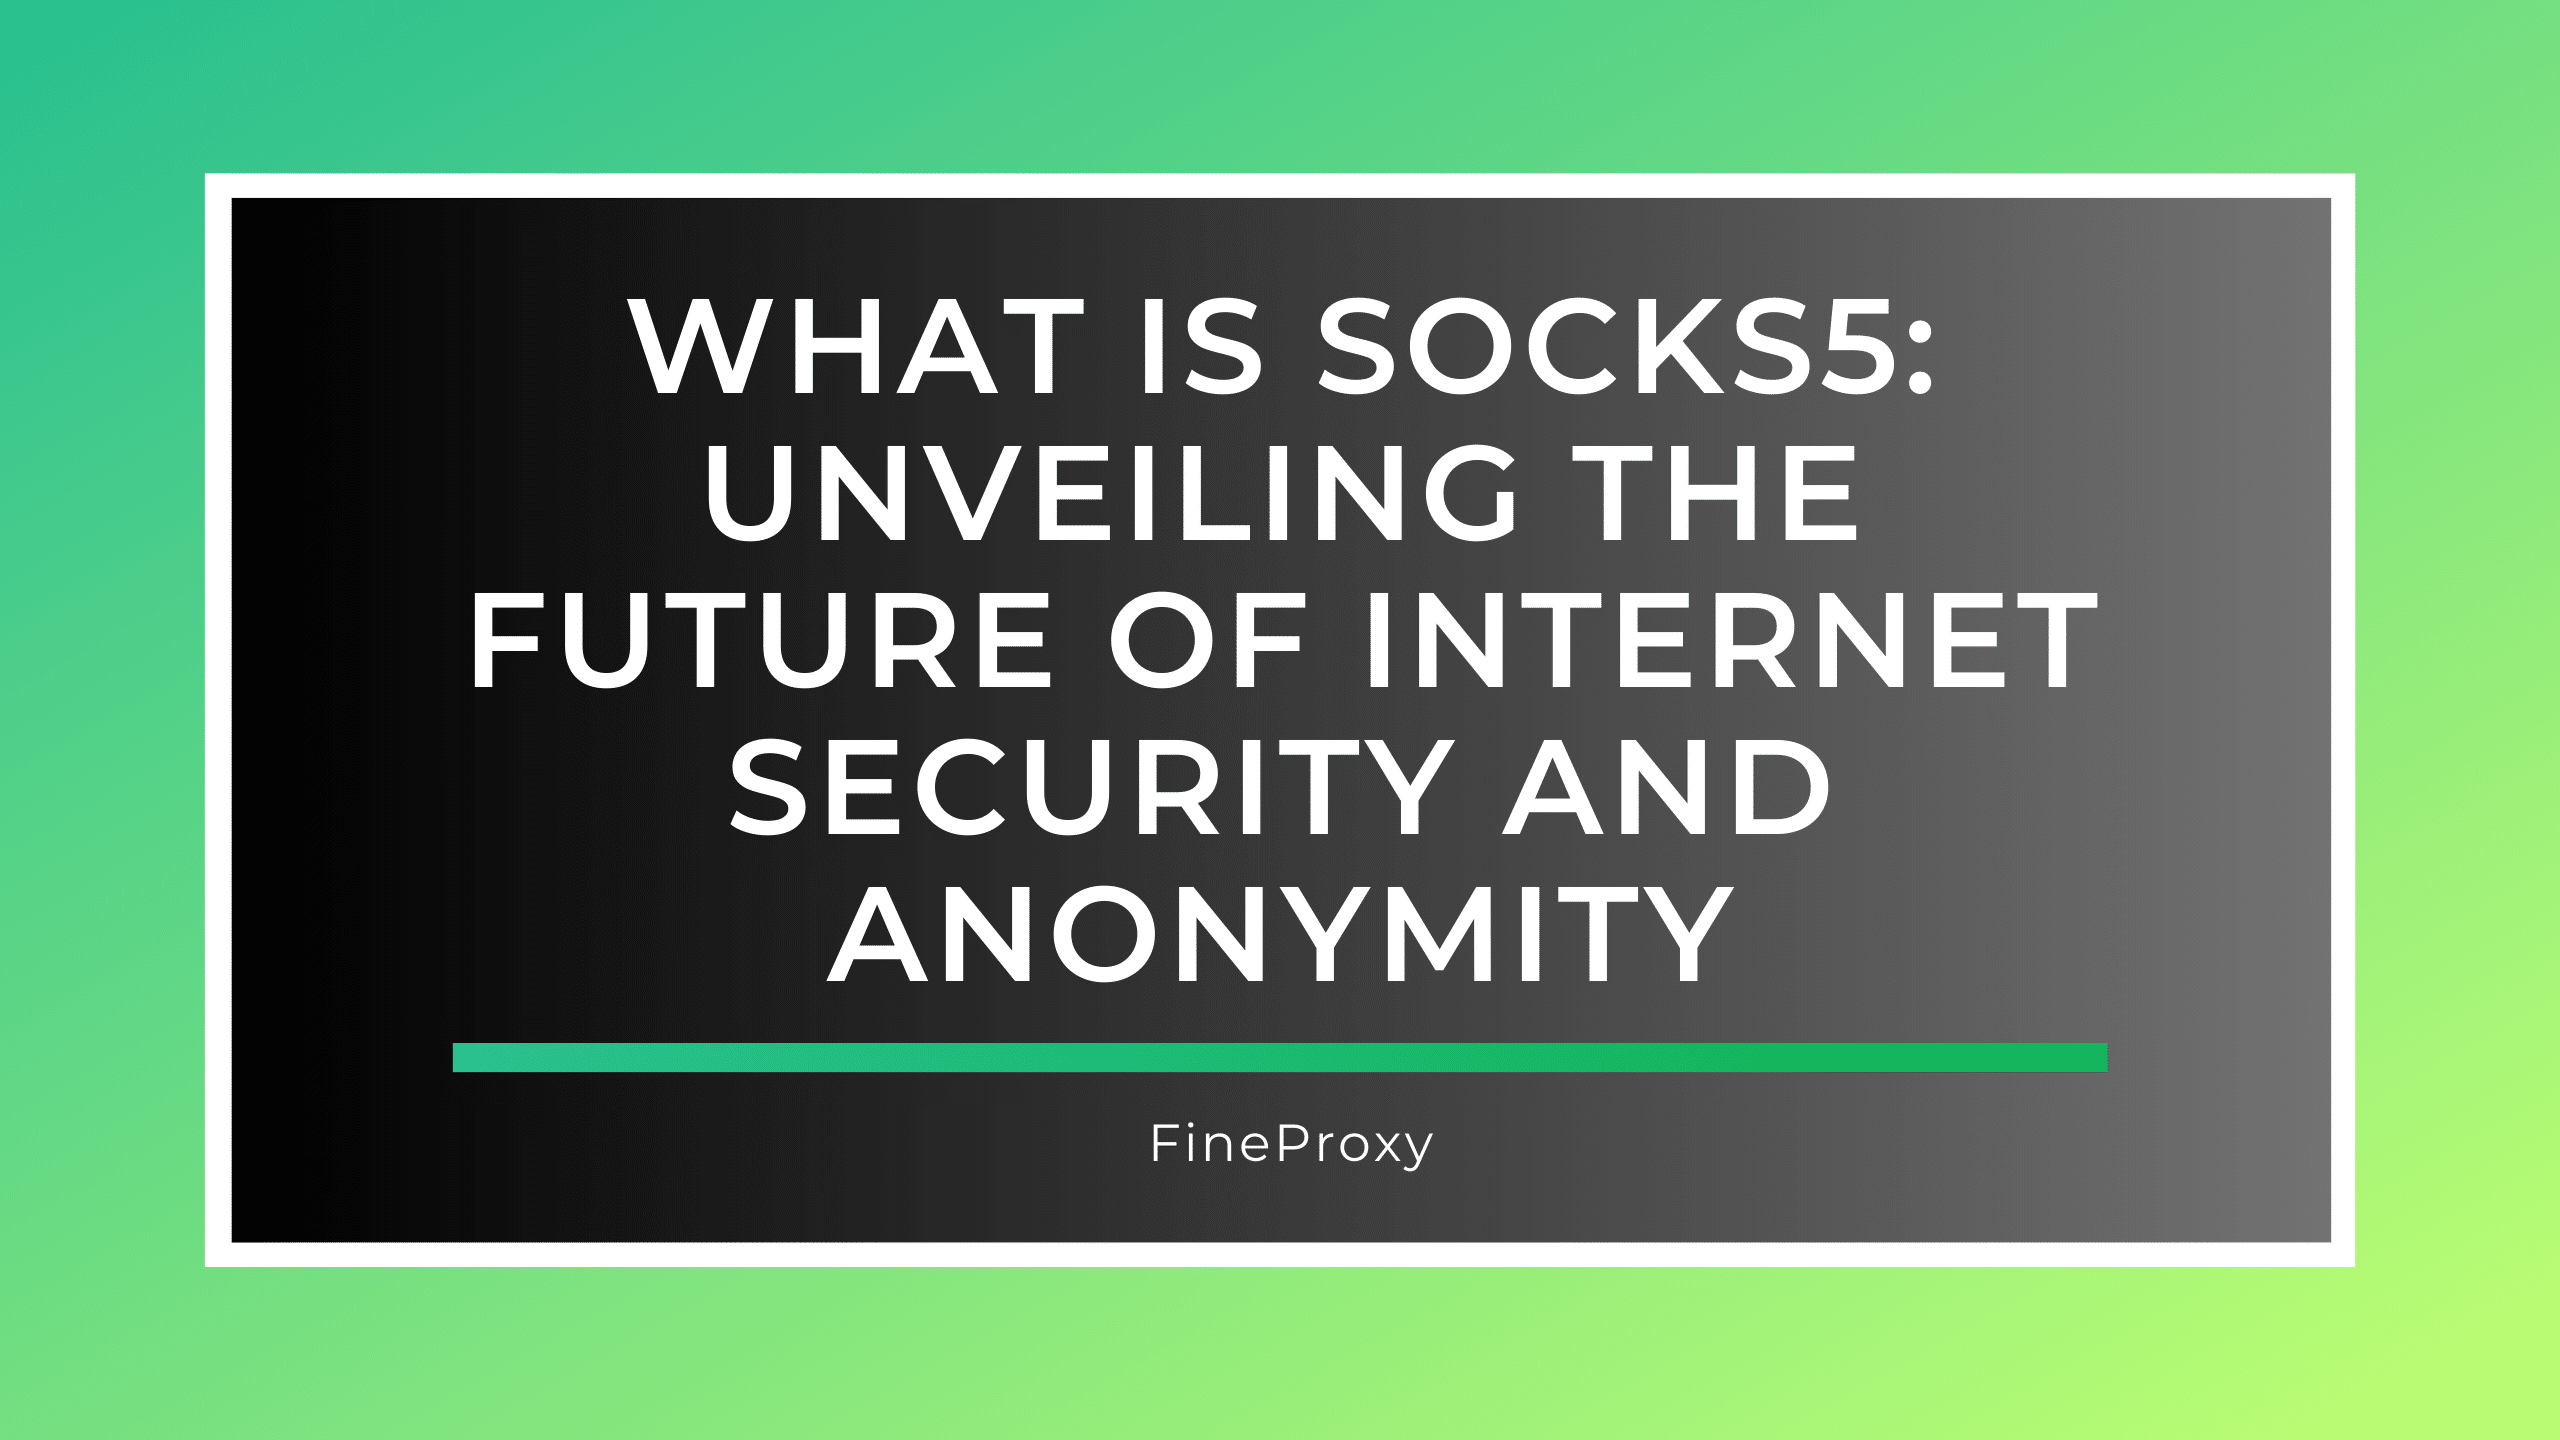 What Is SOCKS5: Unveiling The Future of Internet Security and Anonymity